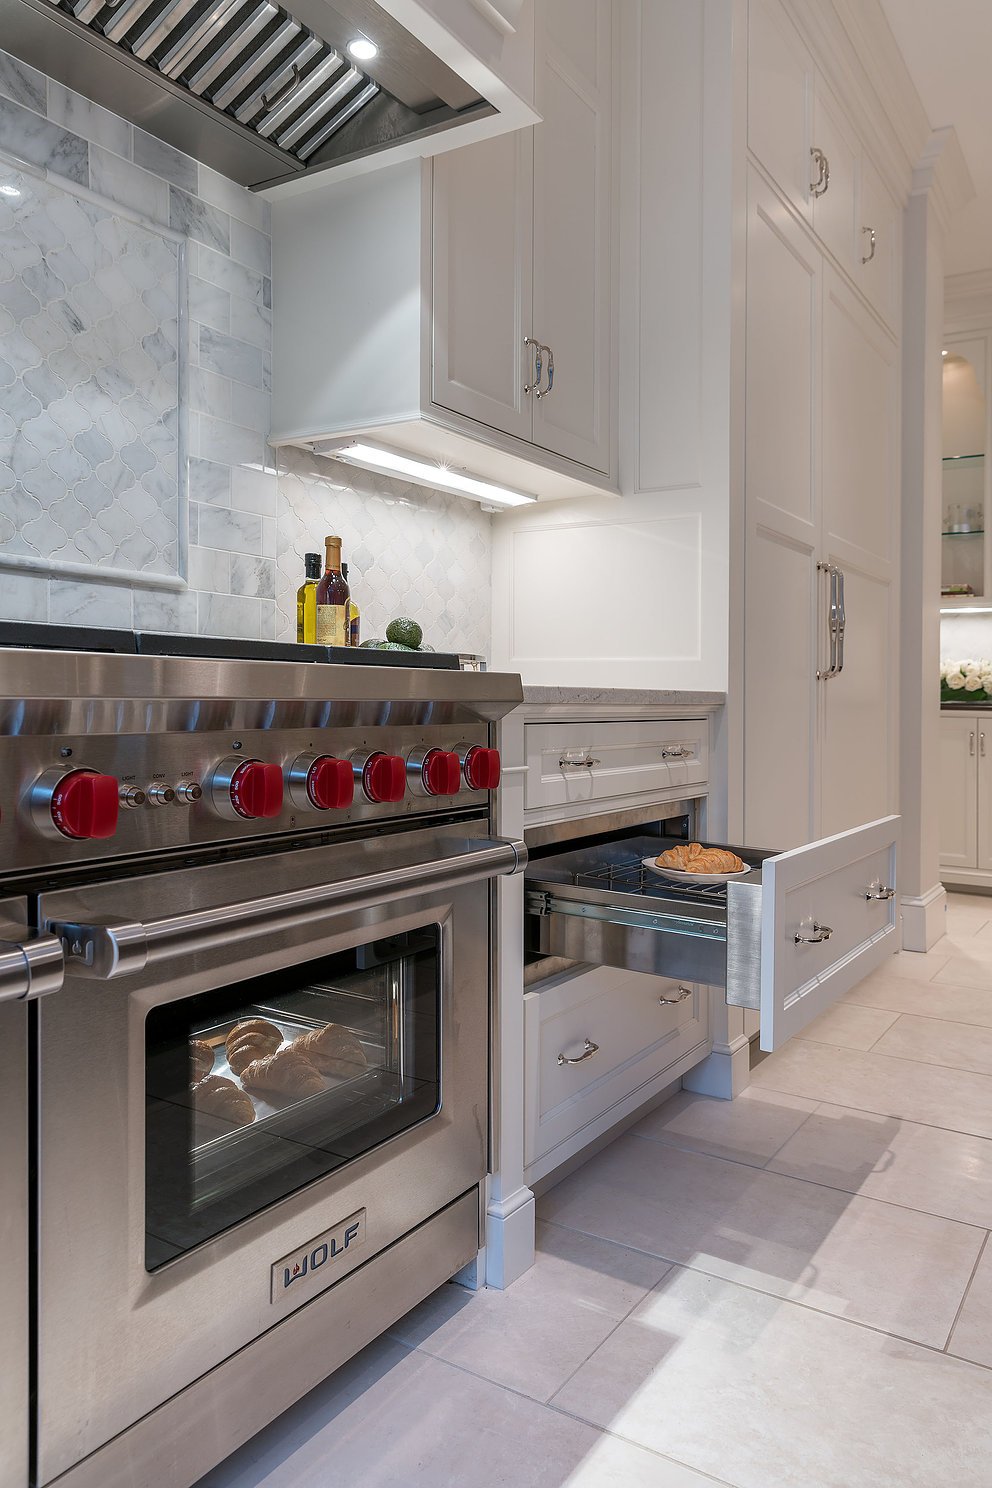 oven and warming drawer in kitchen renovation in brookline, massachusetts